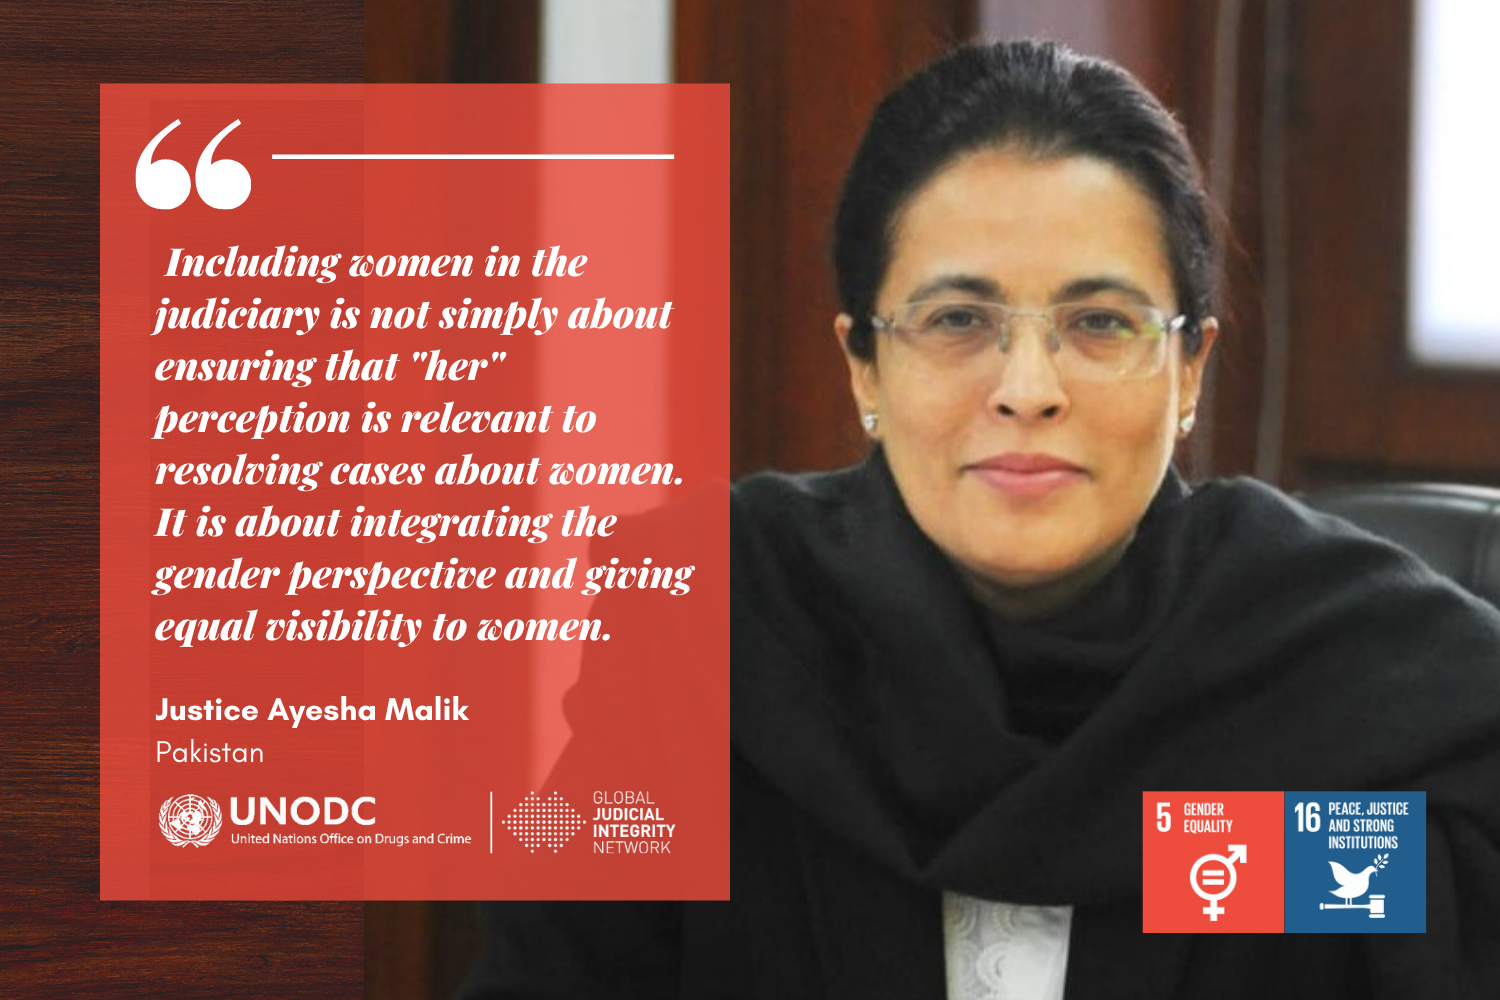 The Importance of Women in the Judiciary to Integrate the Gender Perspective and Bring Equal Visibility.